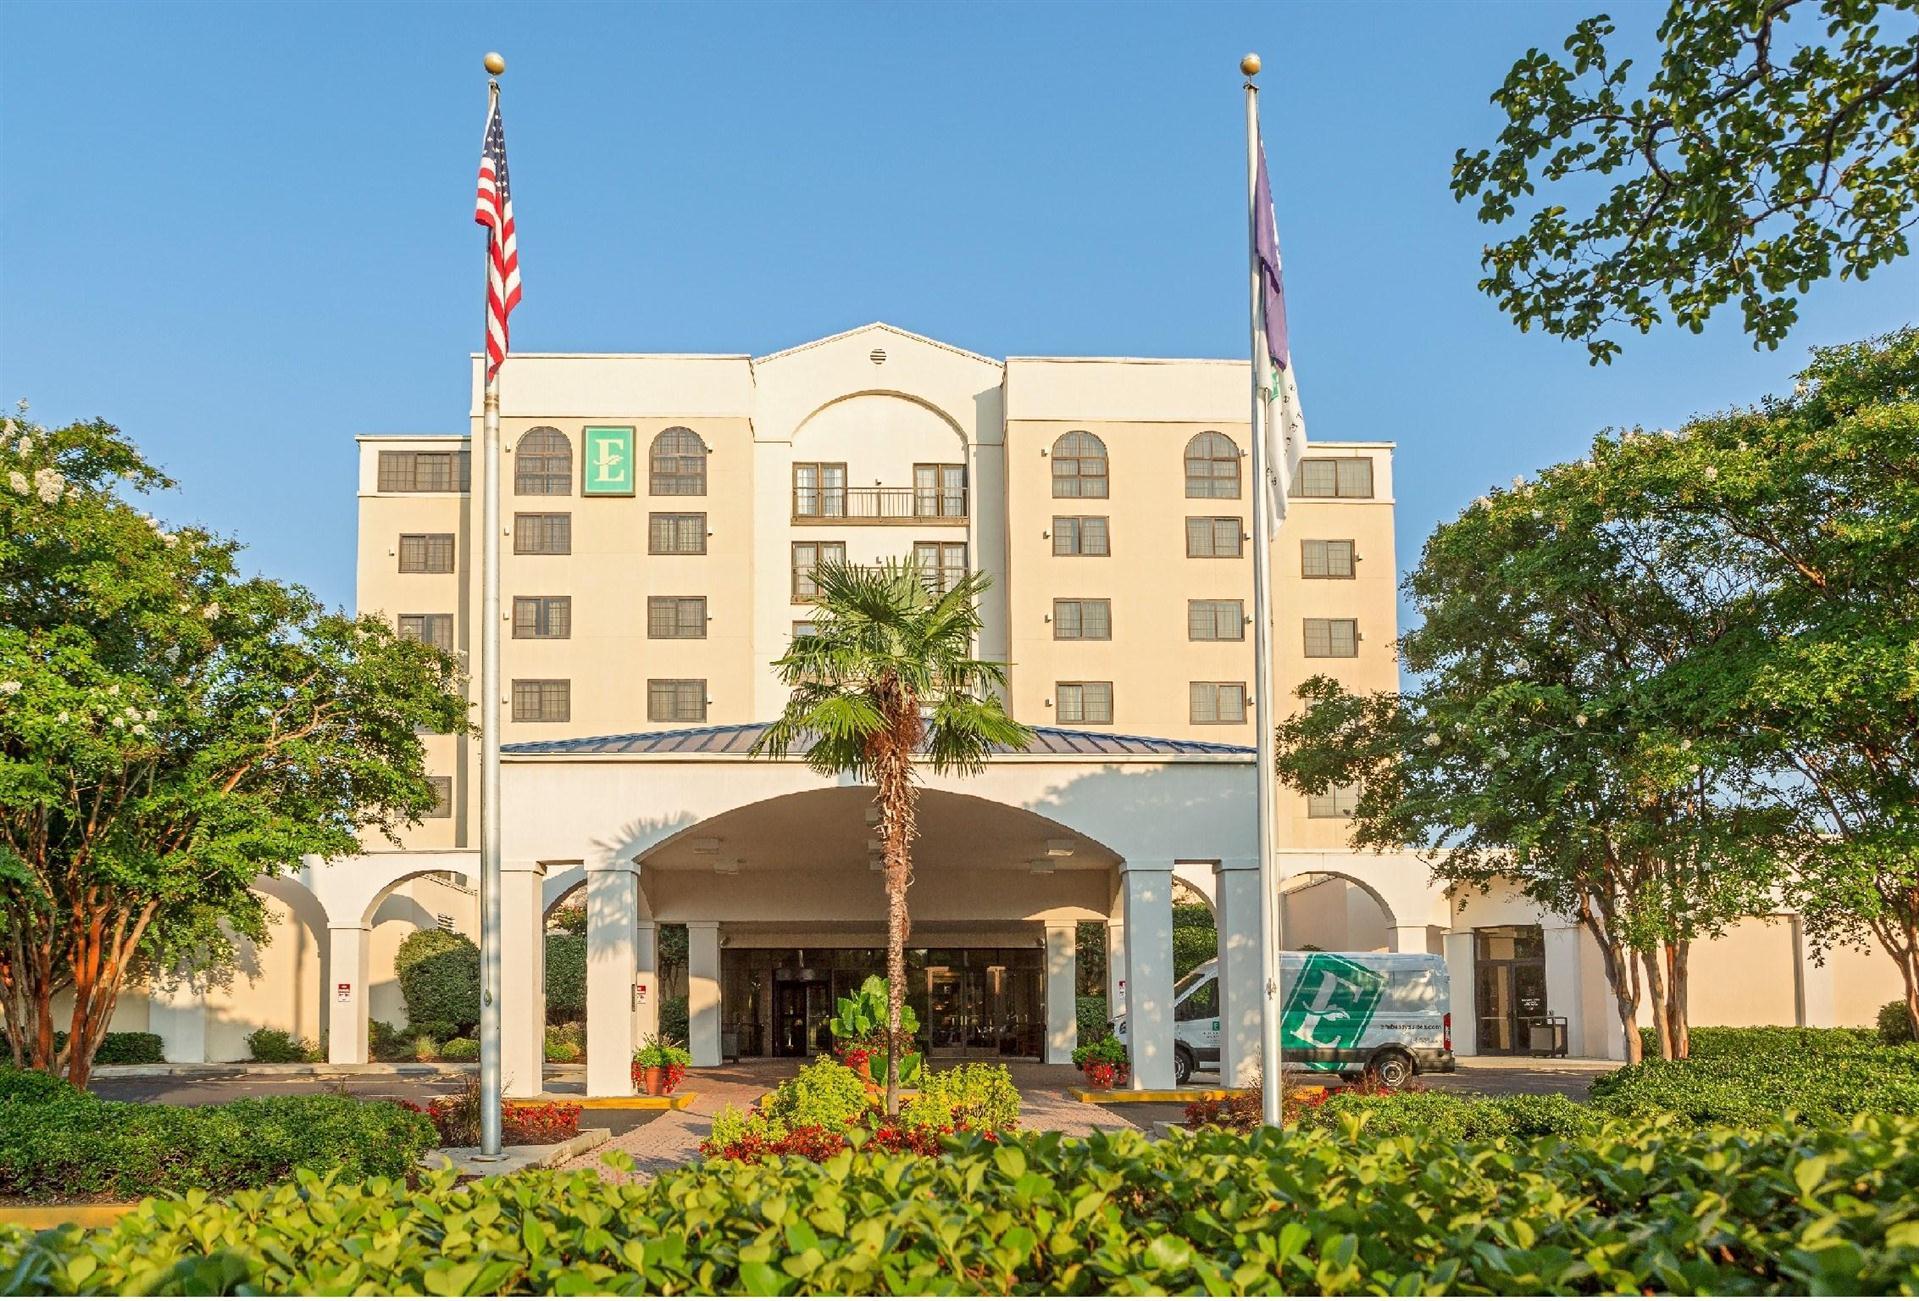 Embassy Suites by Hilton Columbia Greystone in Columbia, SC